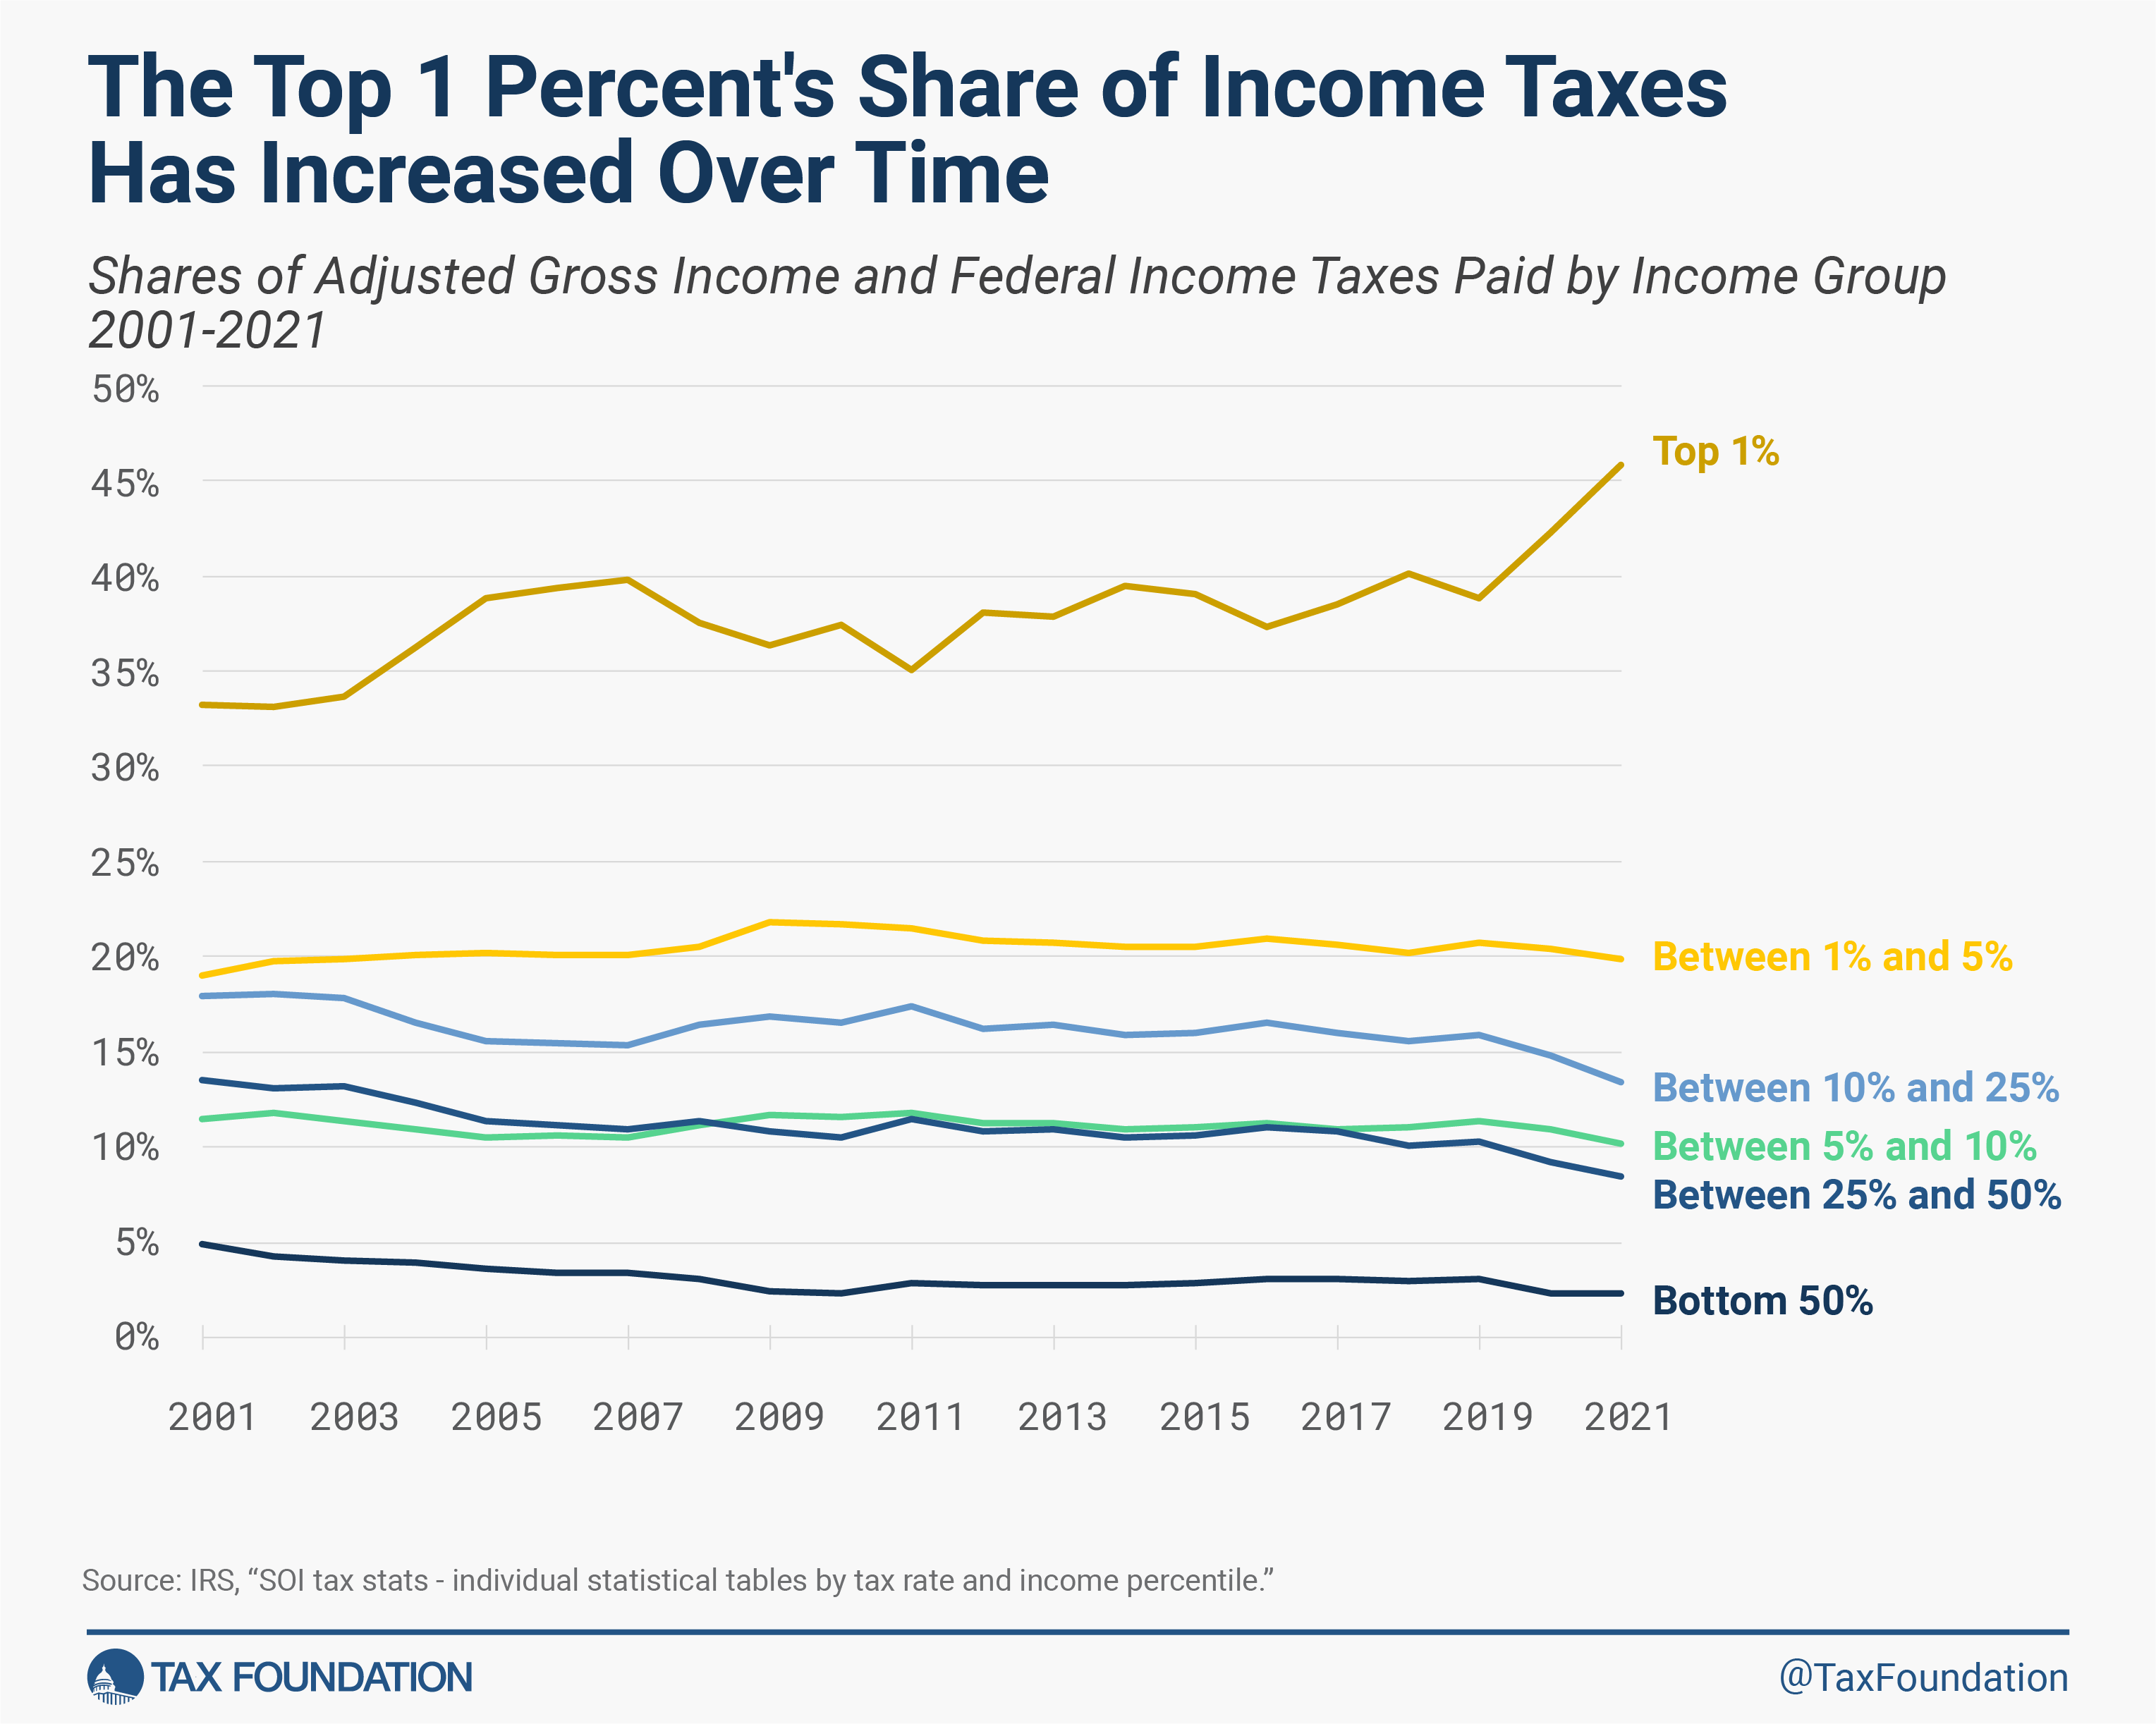 The top 1 percent of taxpayers pay more in taxes over time